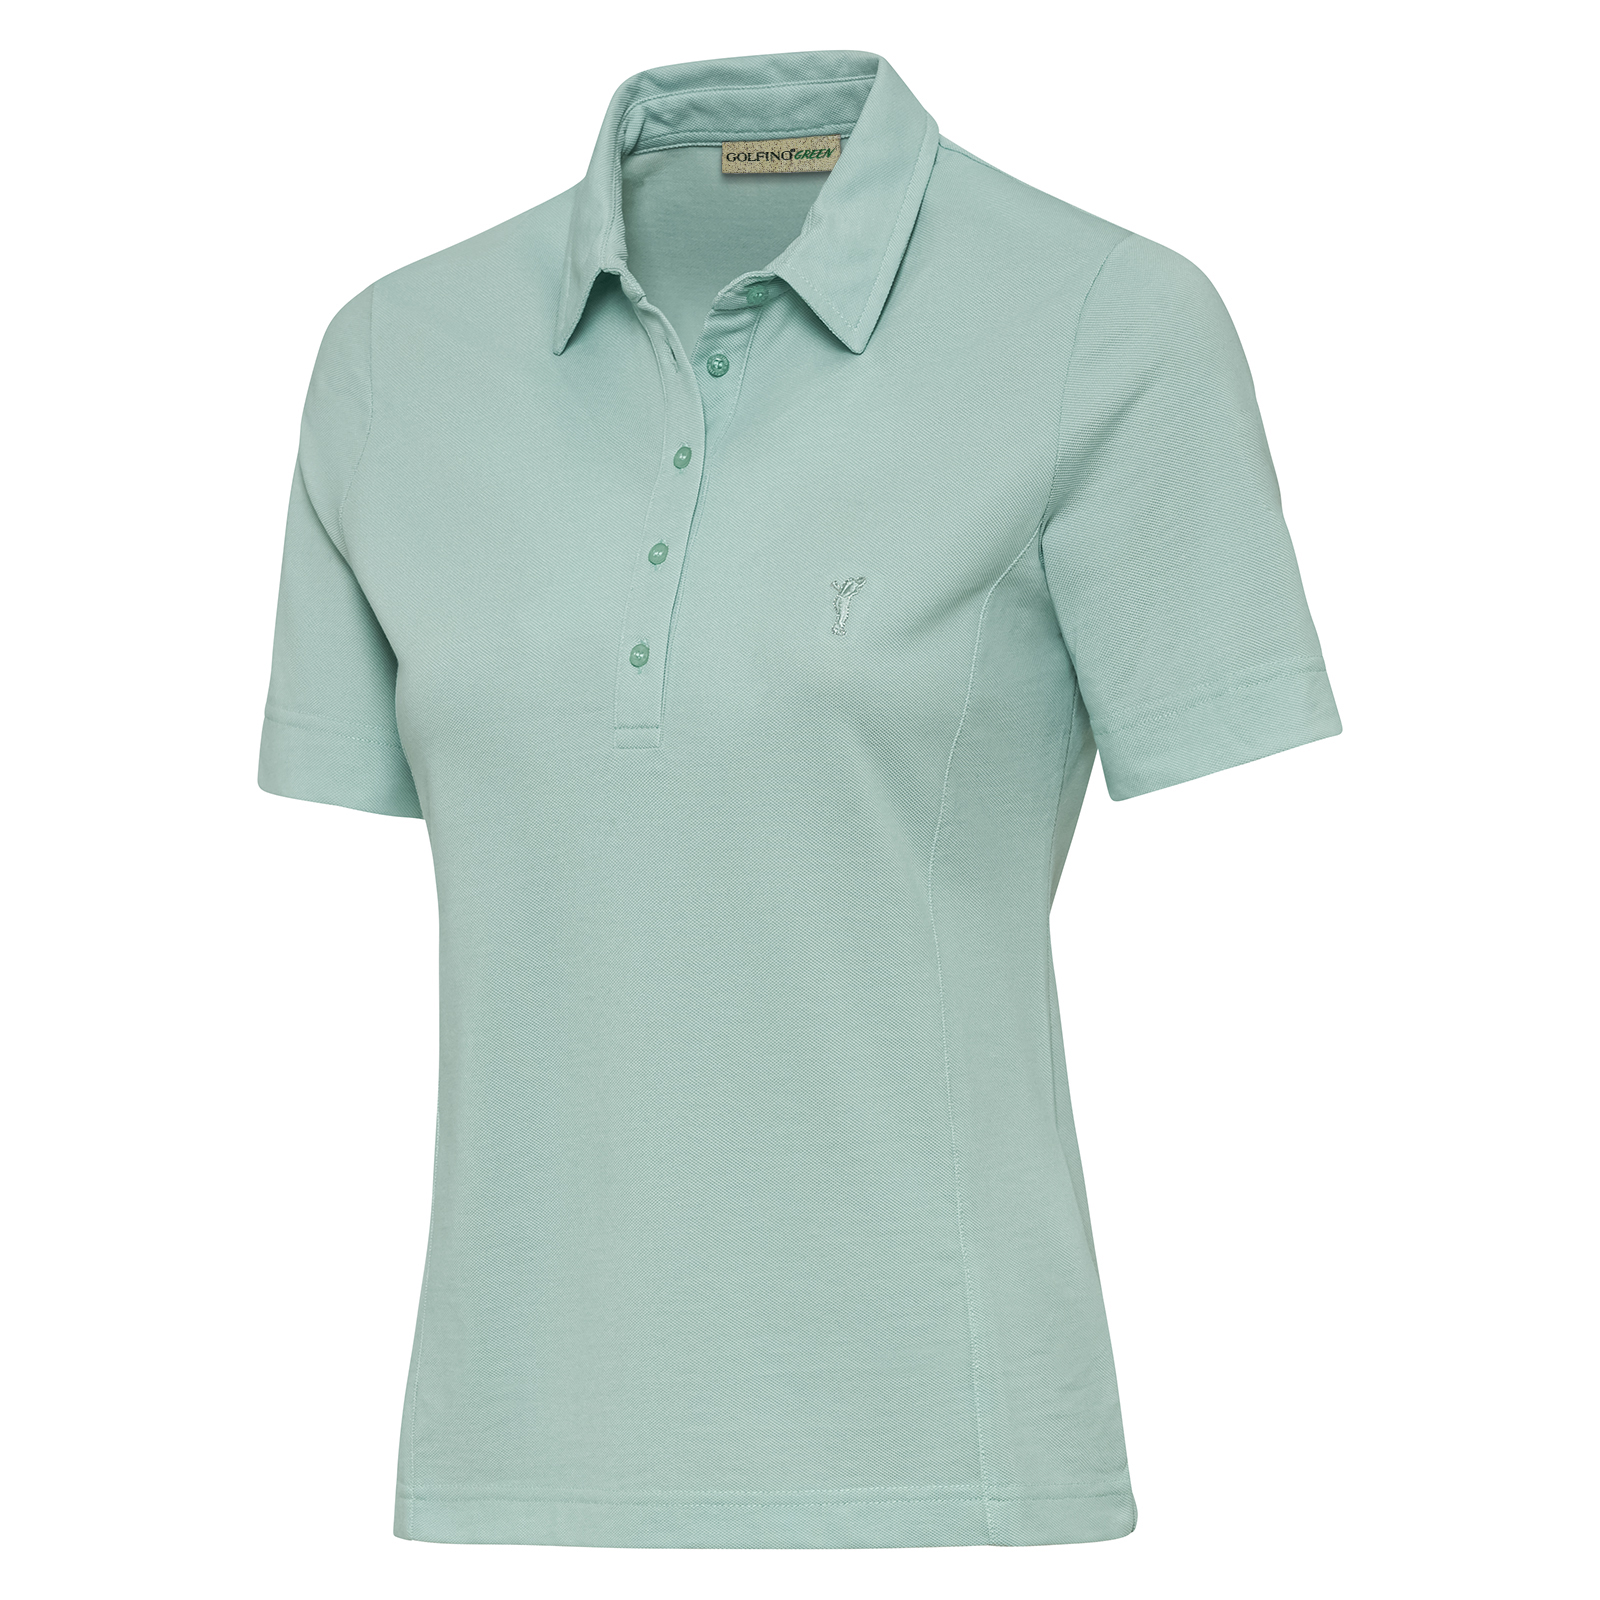 Sustainably produced ladies' golf top